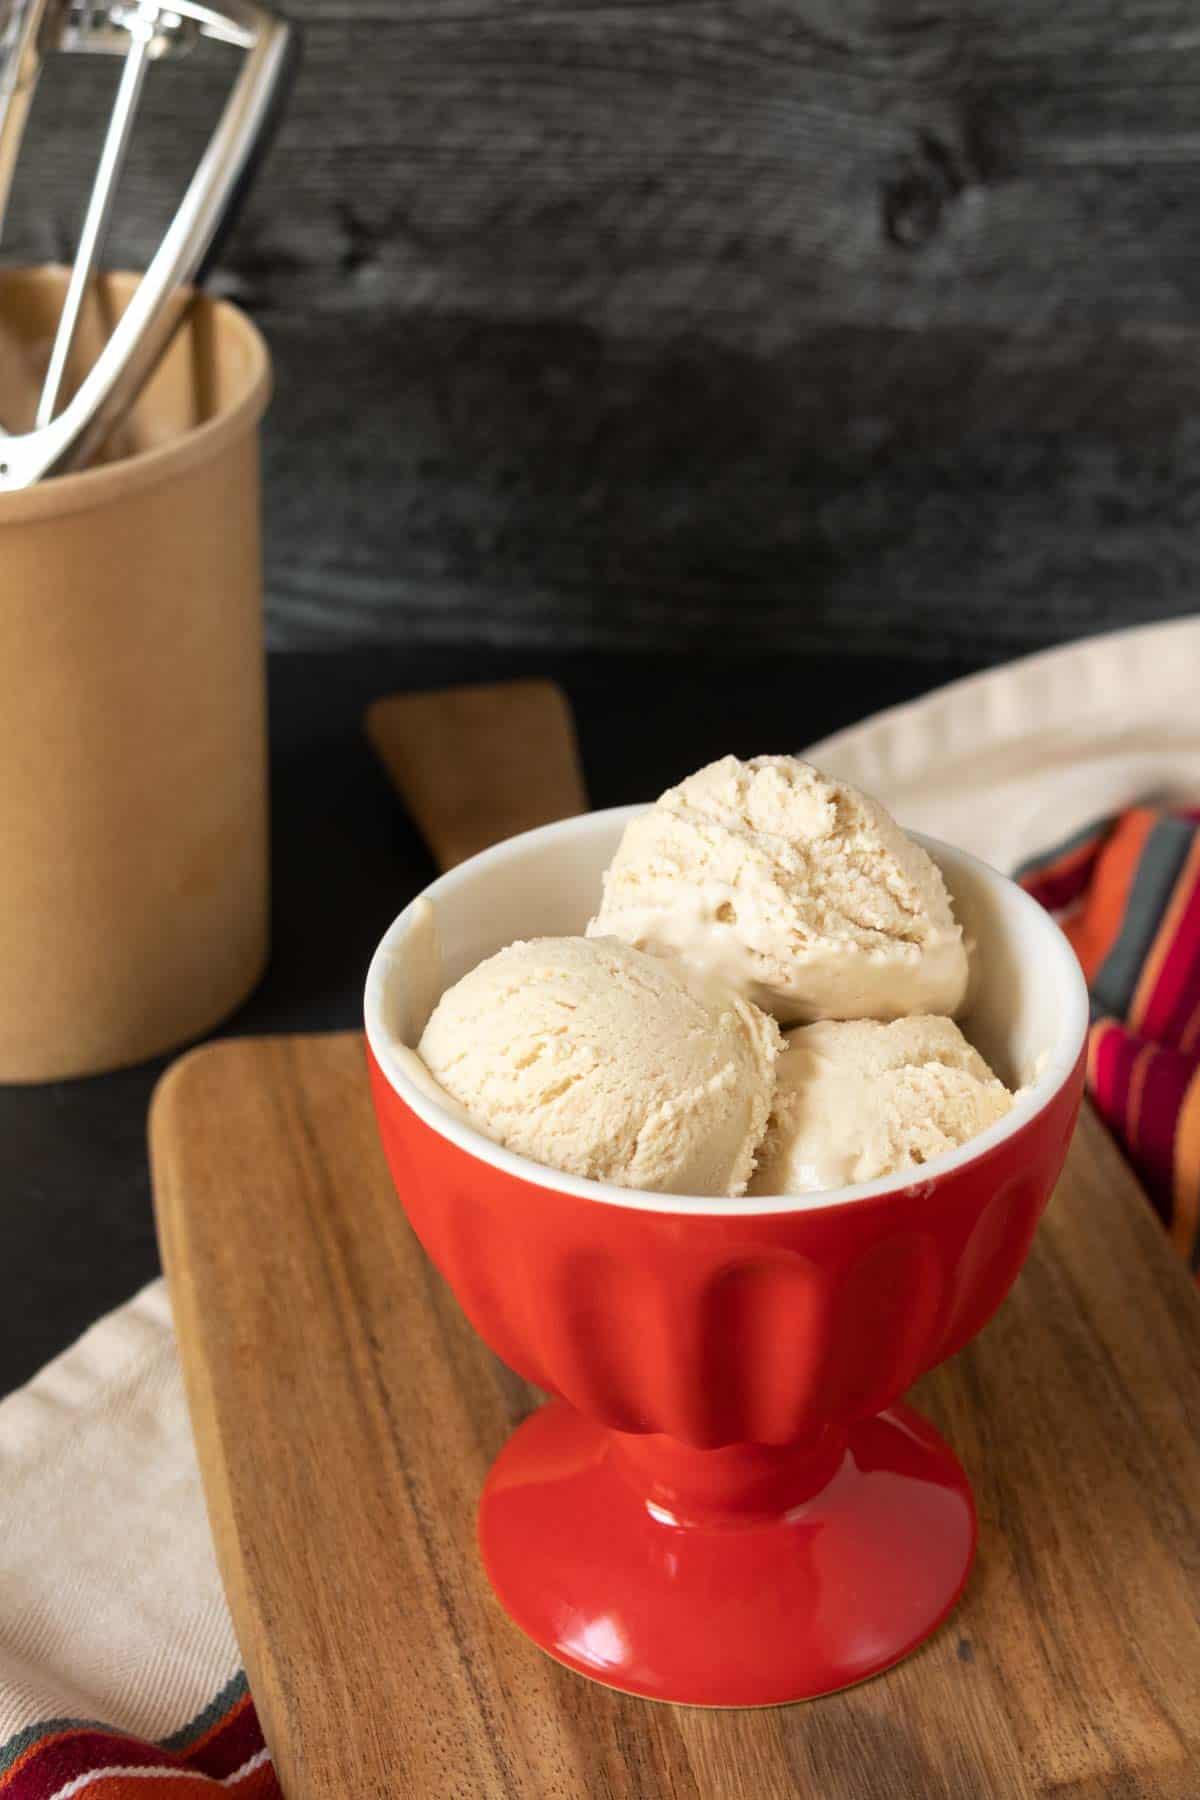 Red ice cream bowl with no-churn ice cream scoops, set on a wooden board.